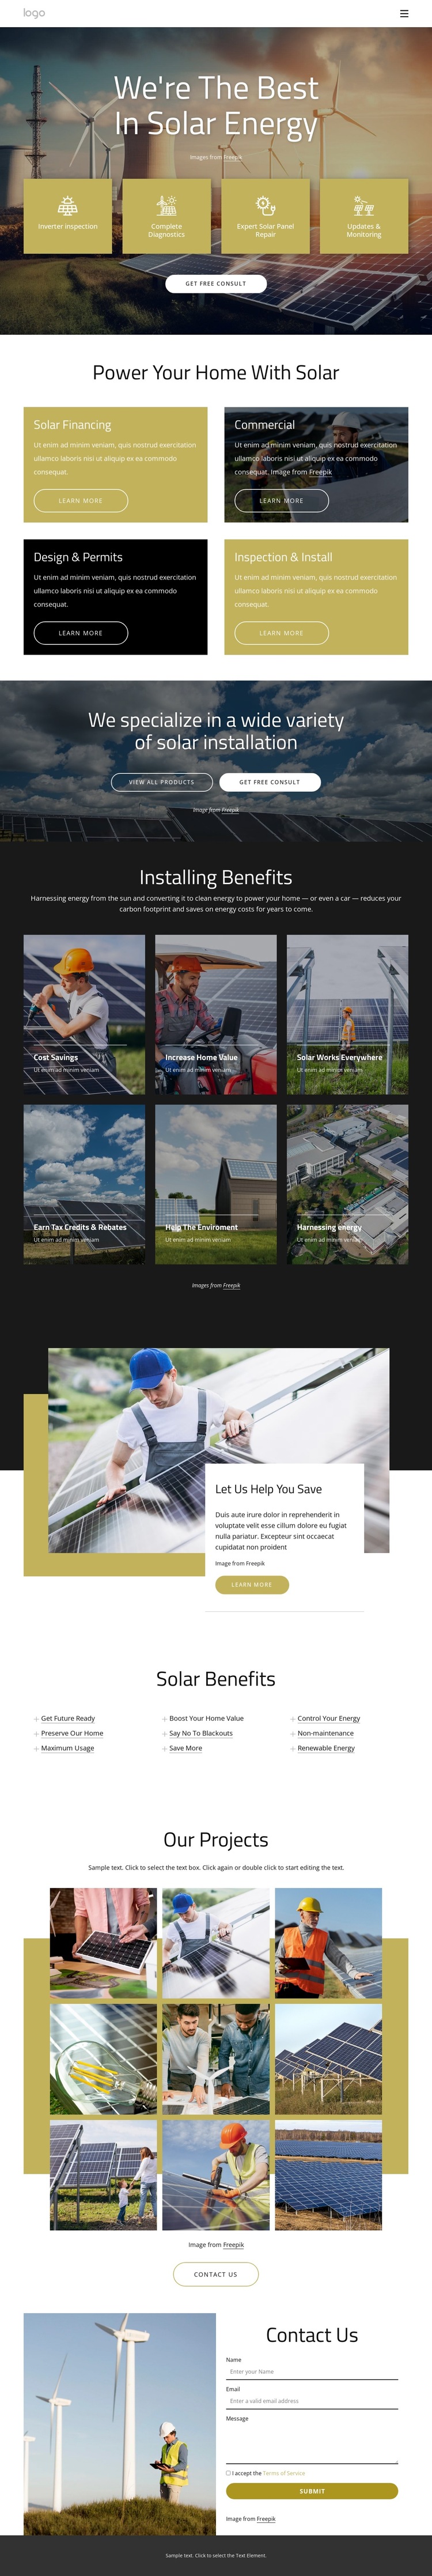 We are the best in solar energy HTML5 Template